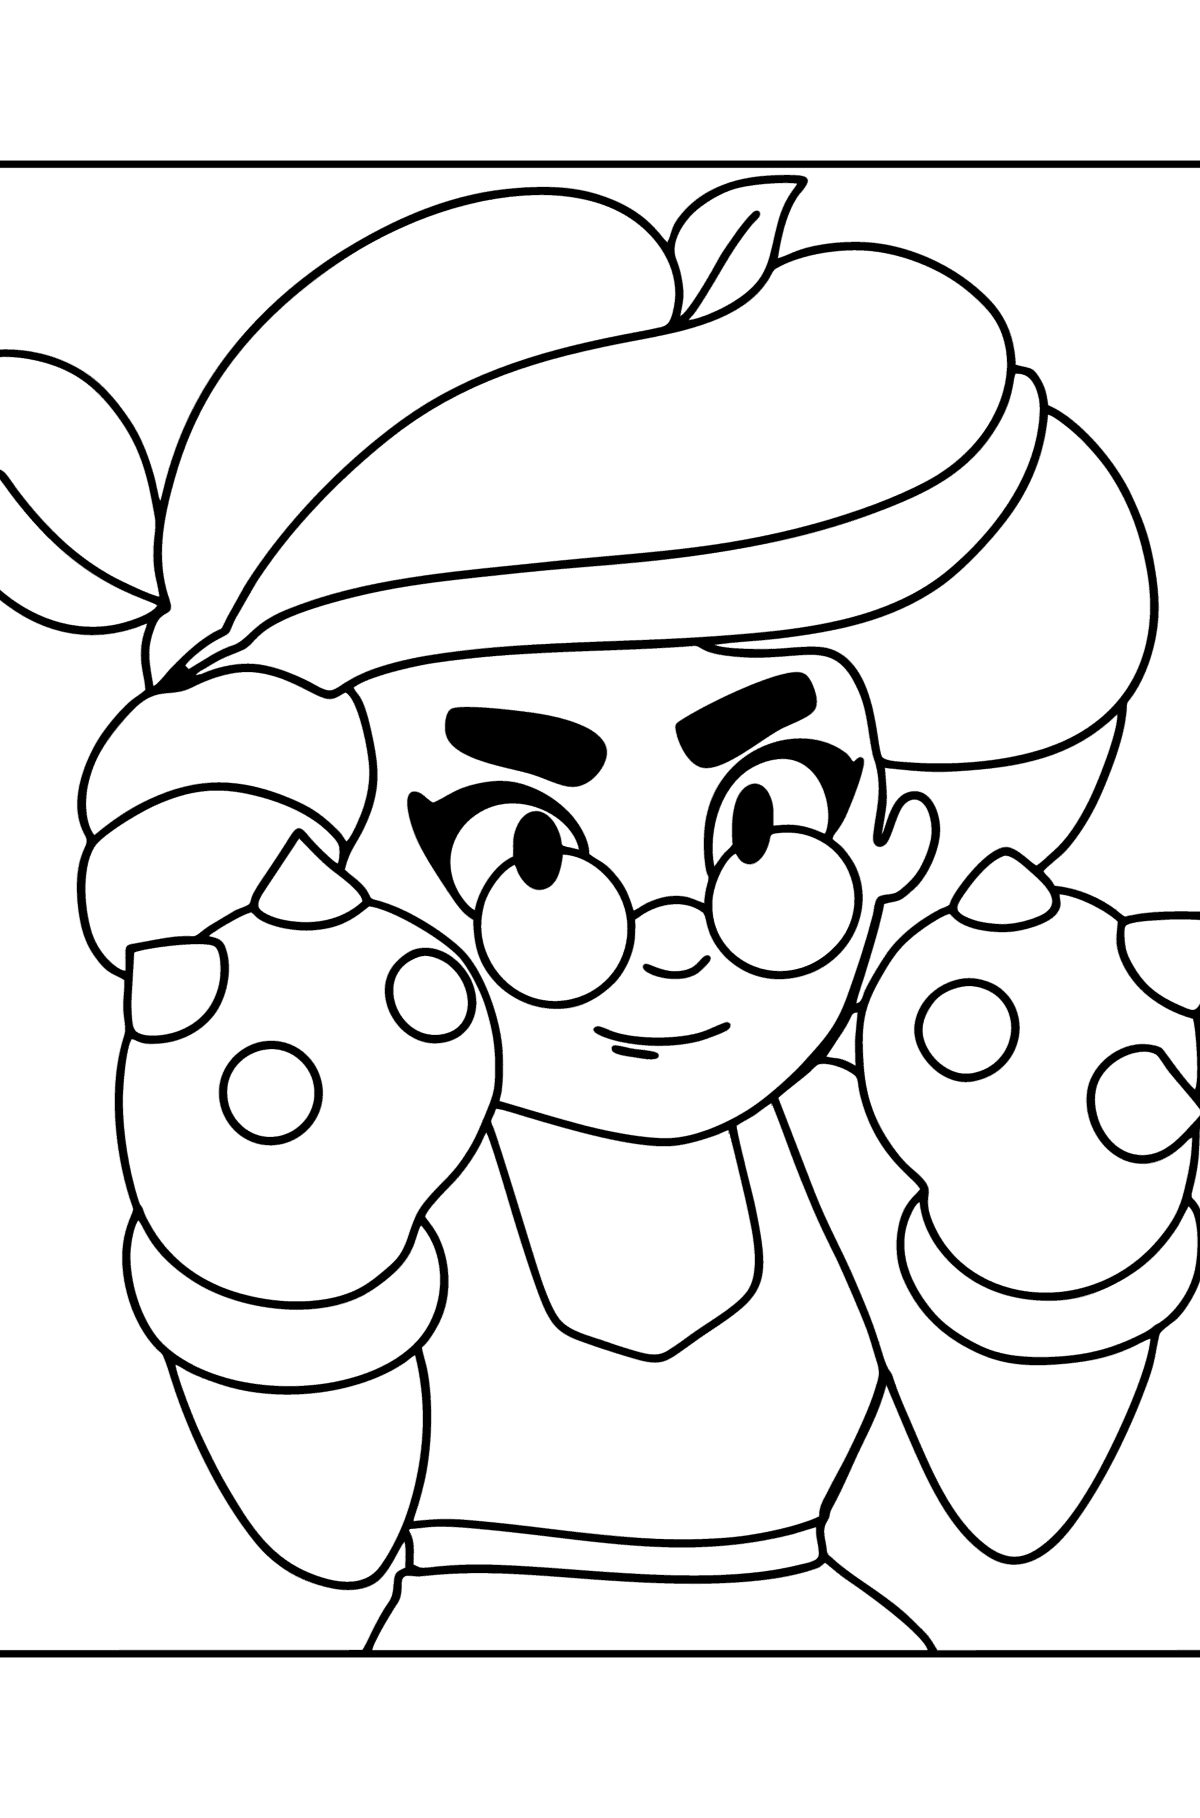 Brawl Stars Rosa coloring page - Coloring Pages for Kids